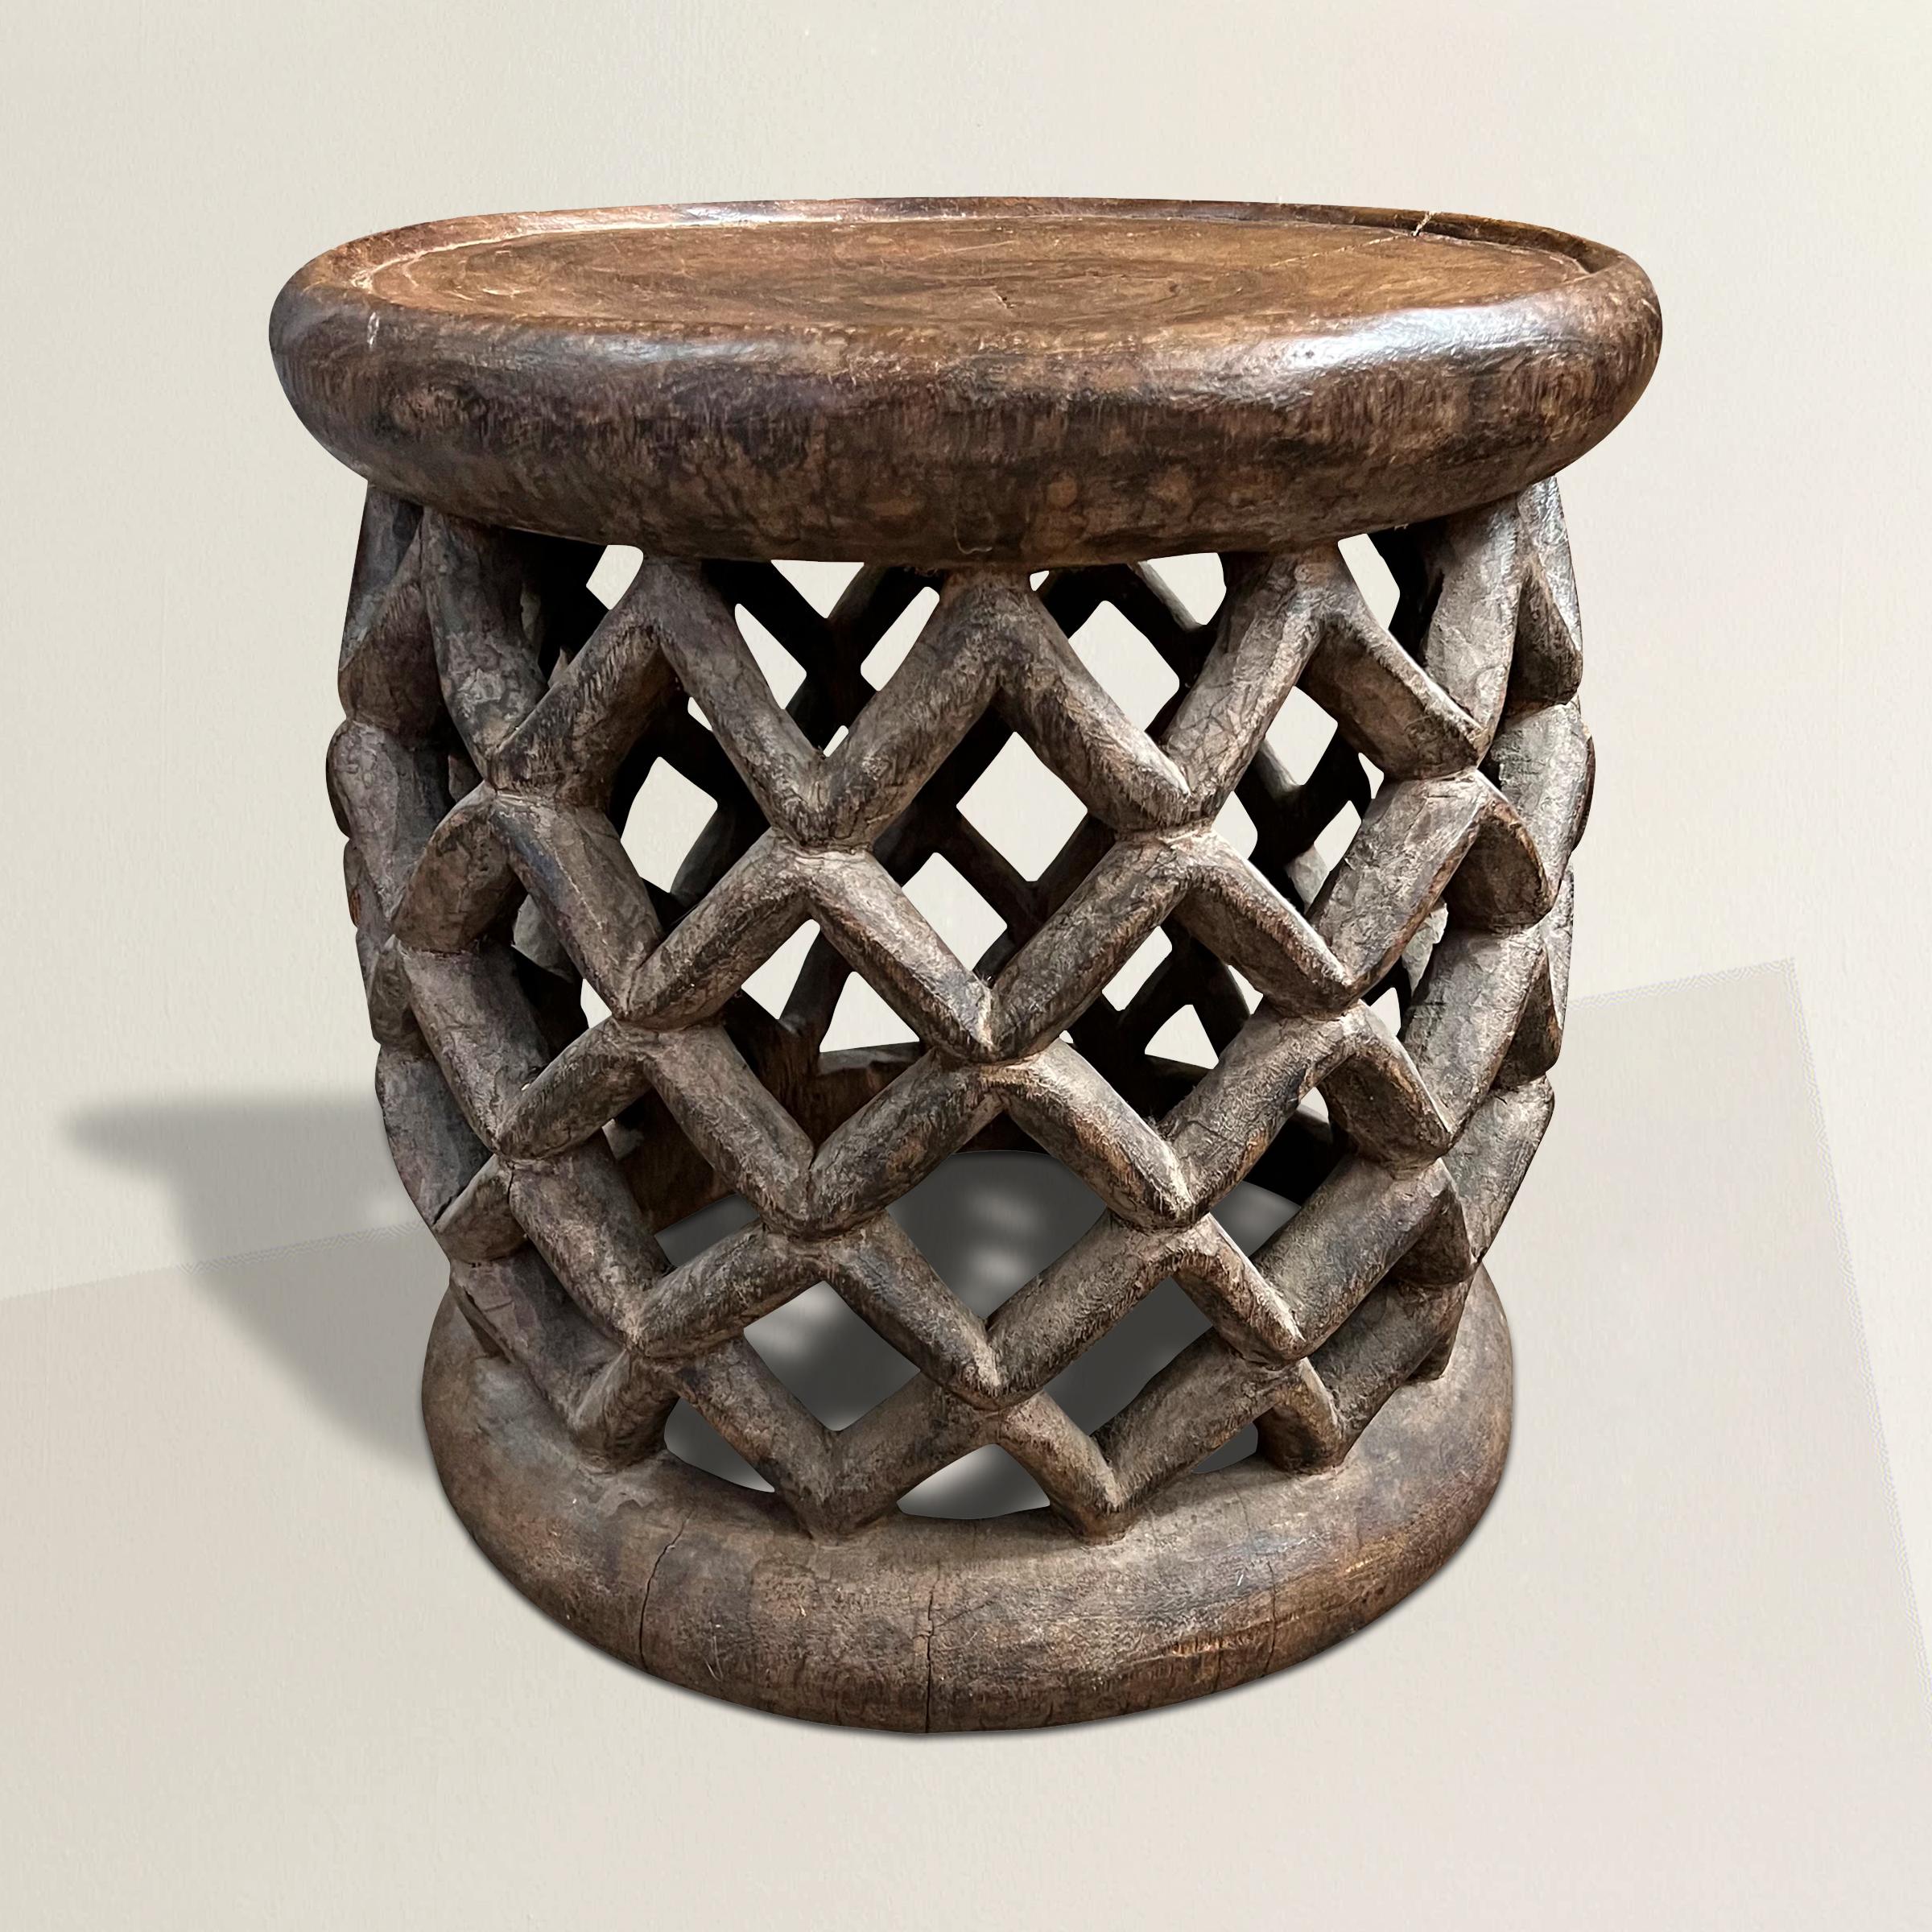 A stunning and expressive early 20th century Bamum stool carved from one piece of wood with an incredible stylized frog motif supporting a solid top with a large lip.